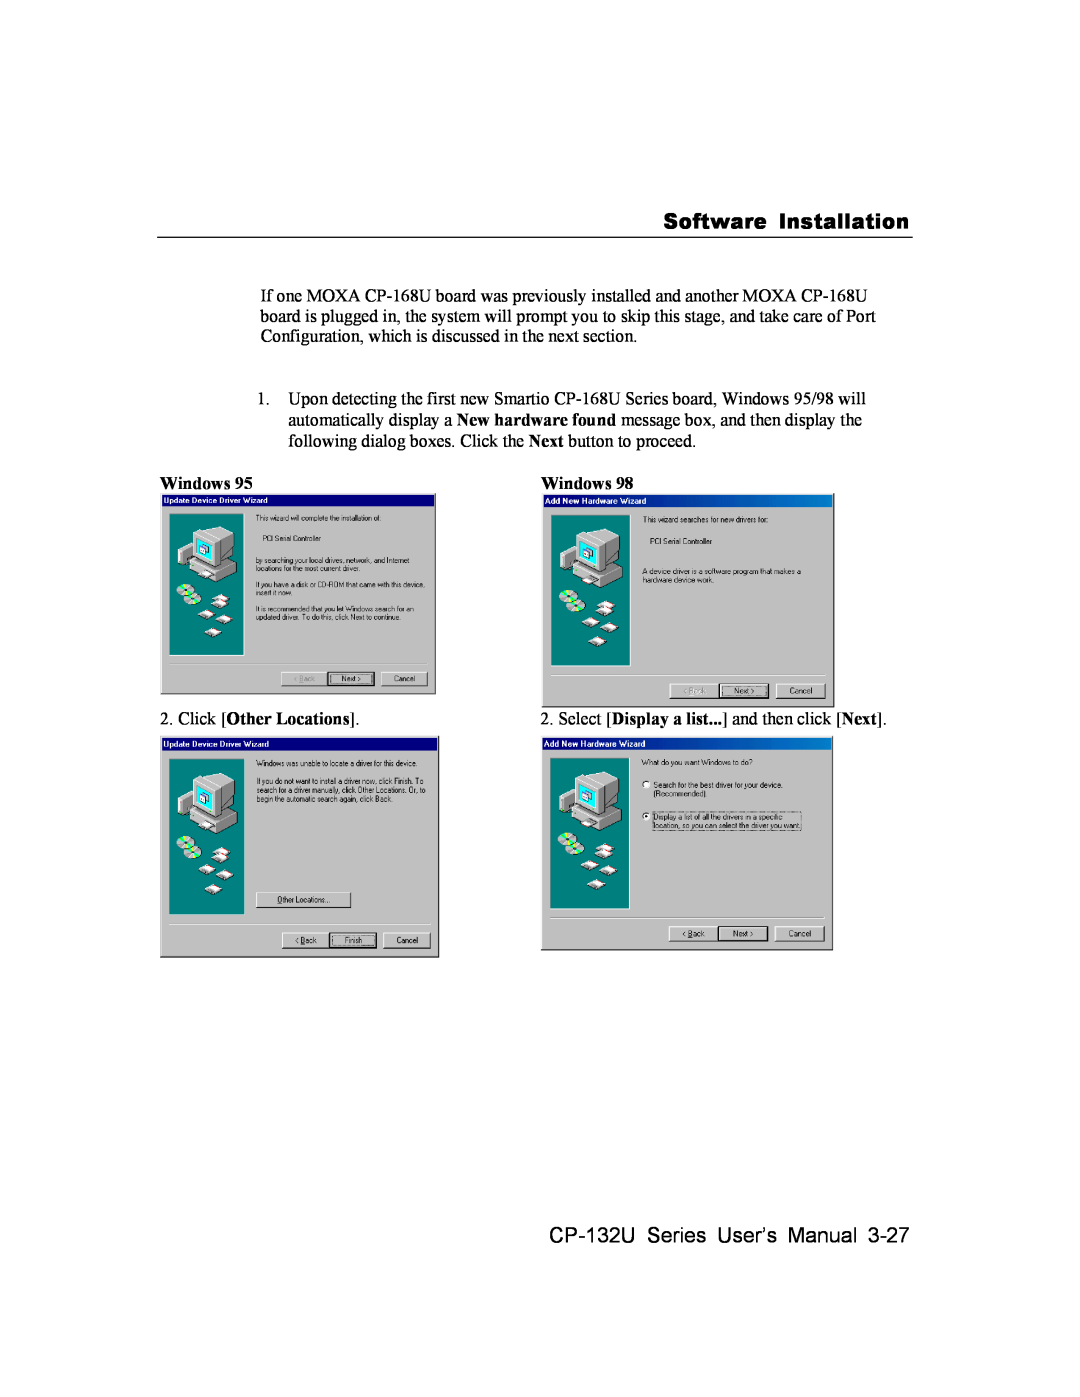 Moxa Technologies user manual Click Other Locations, Software Installation, CP-132U Series User’s Manual, Windows 